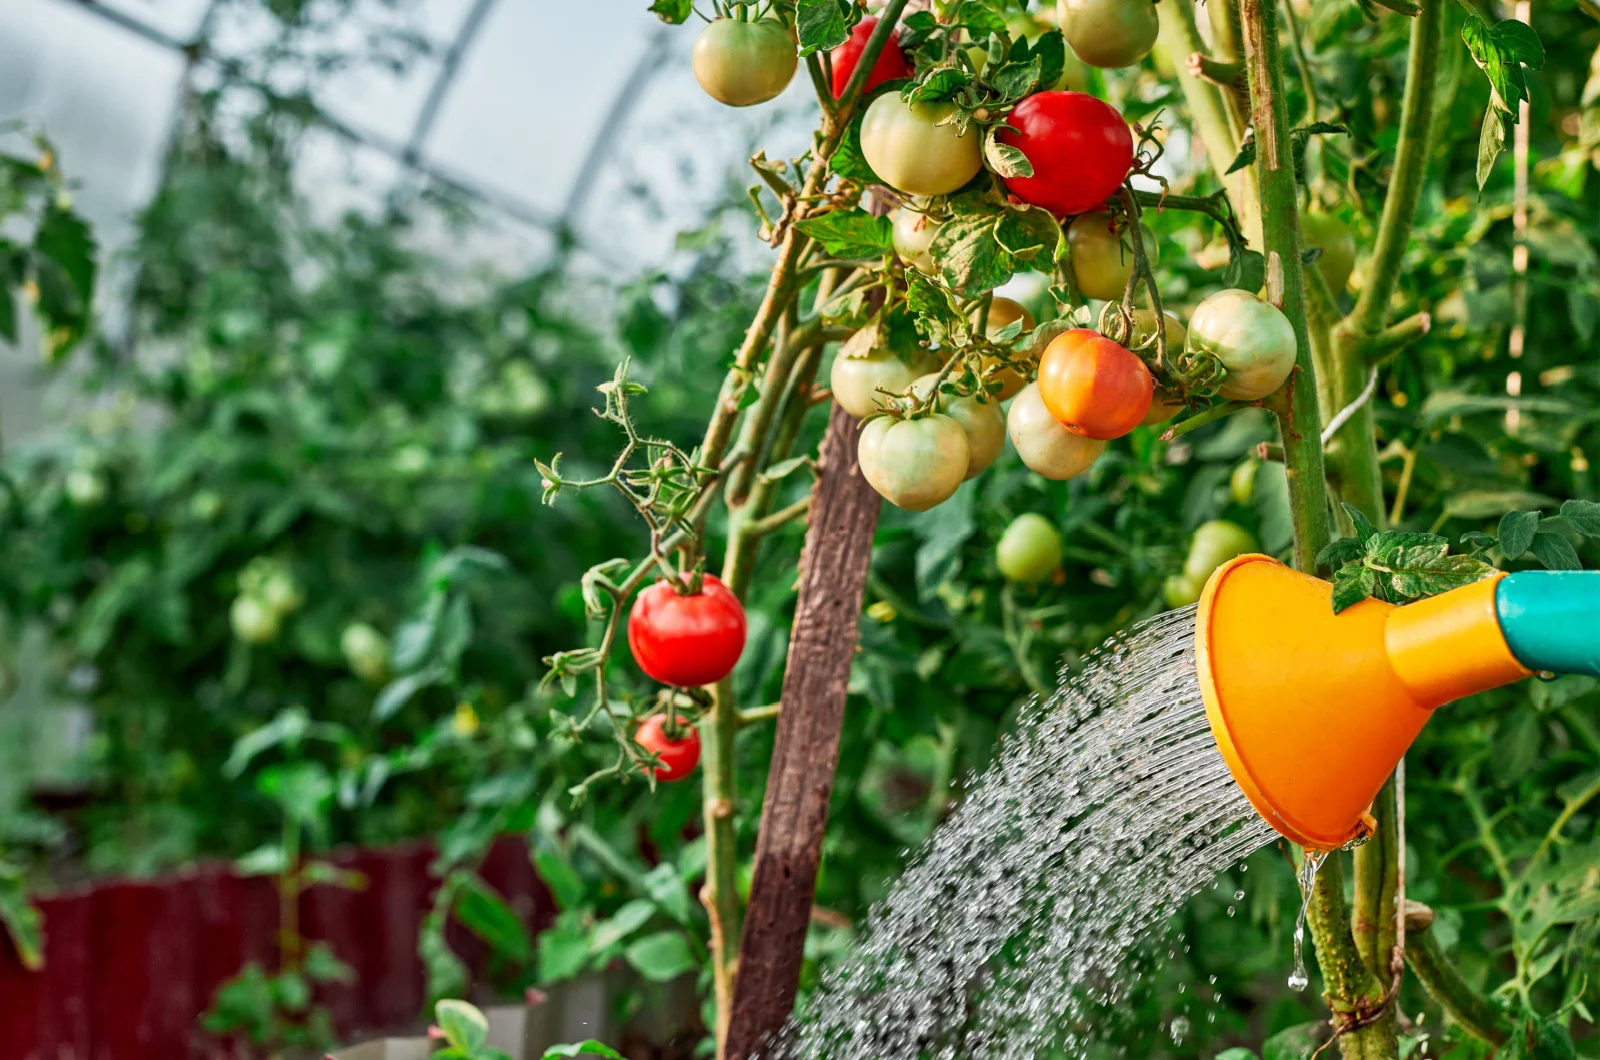 Watering the tomatoes